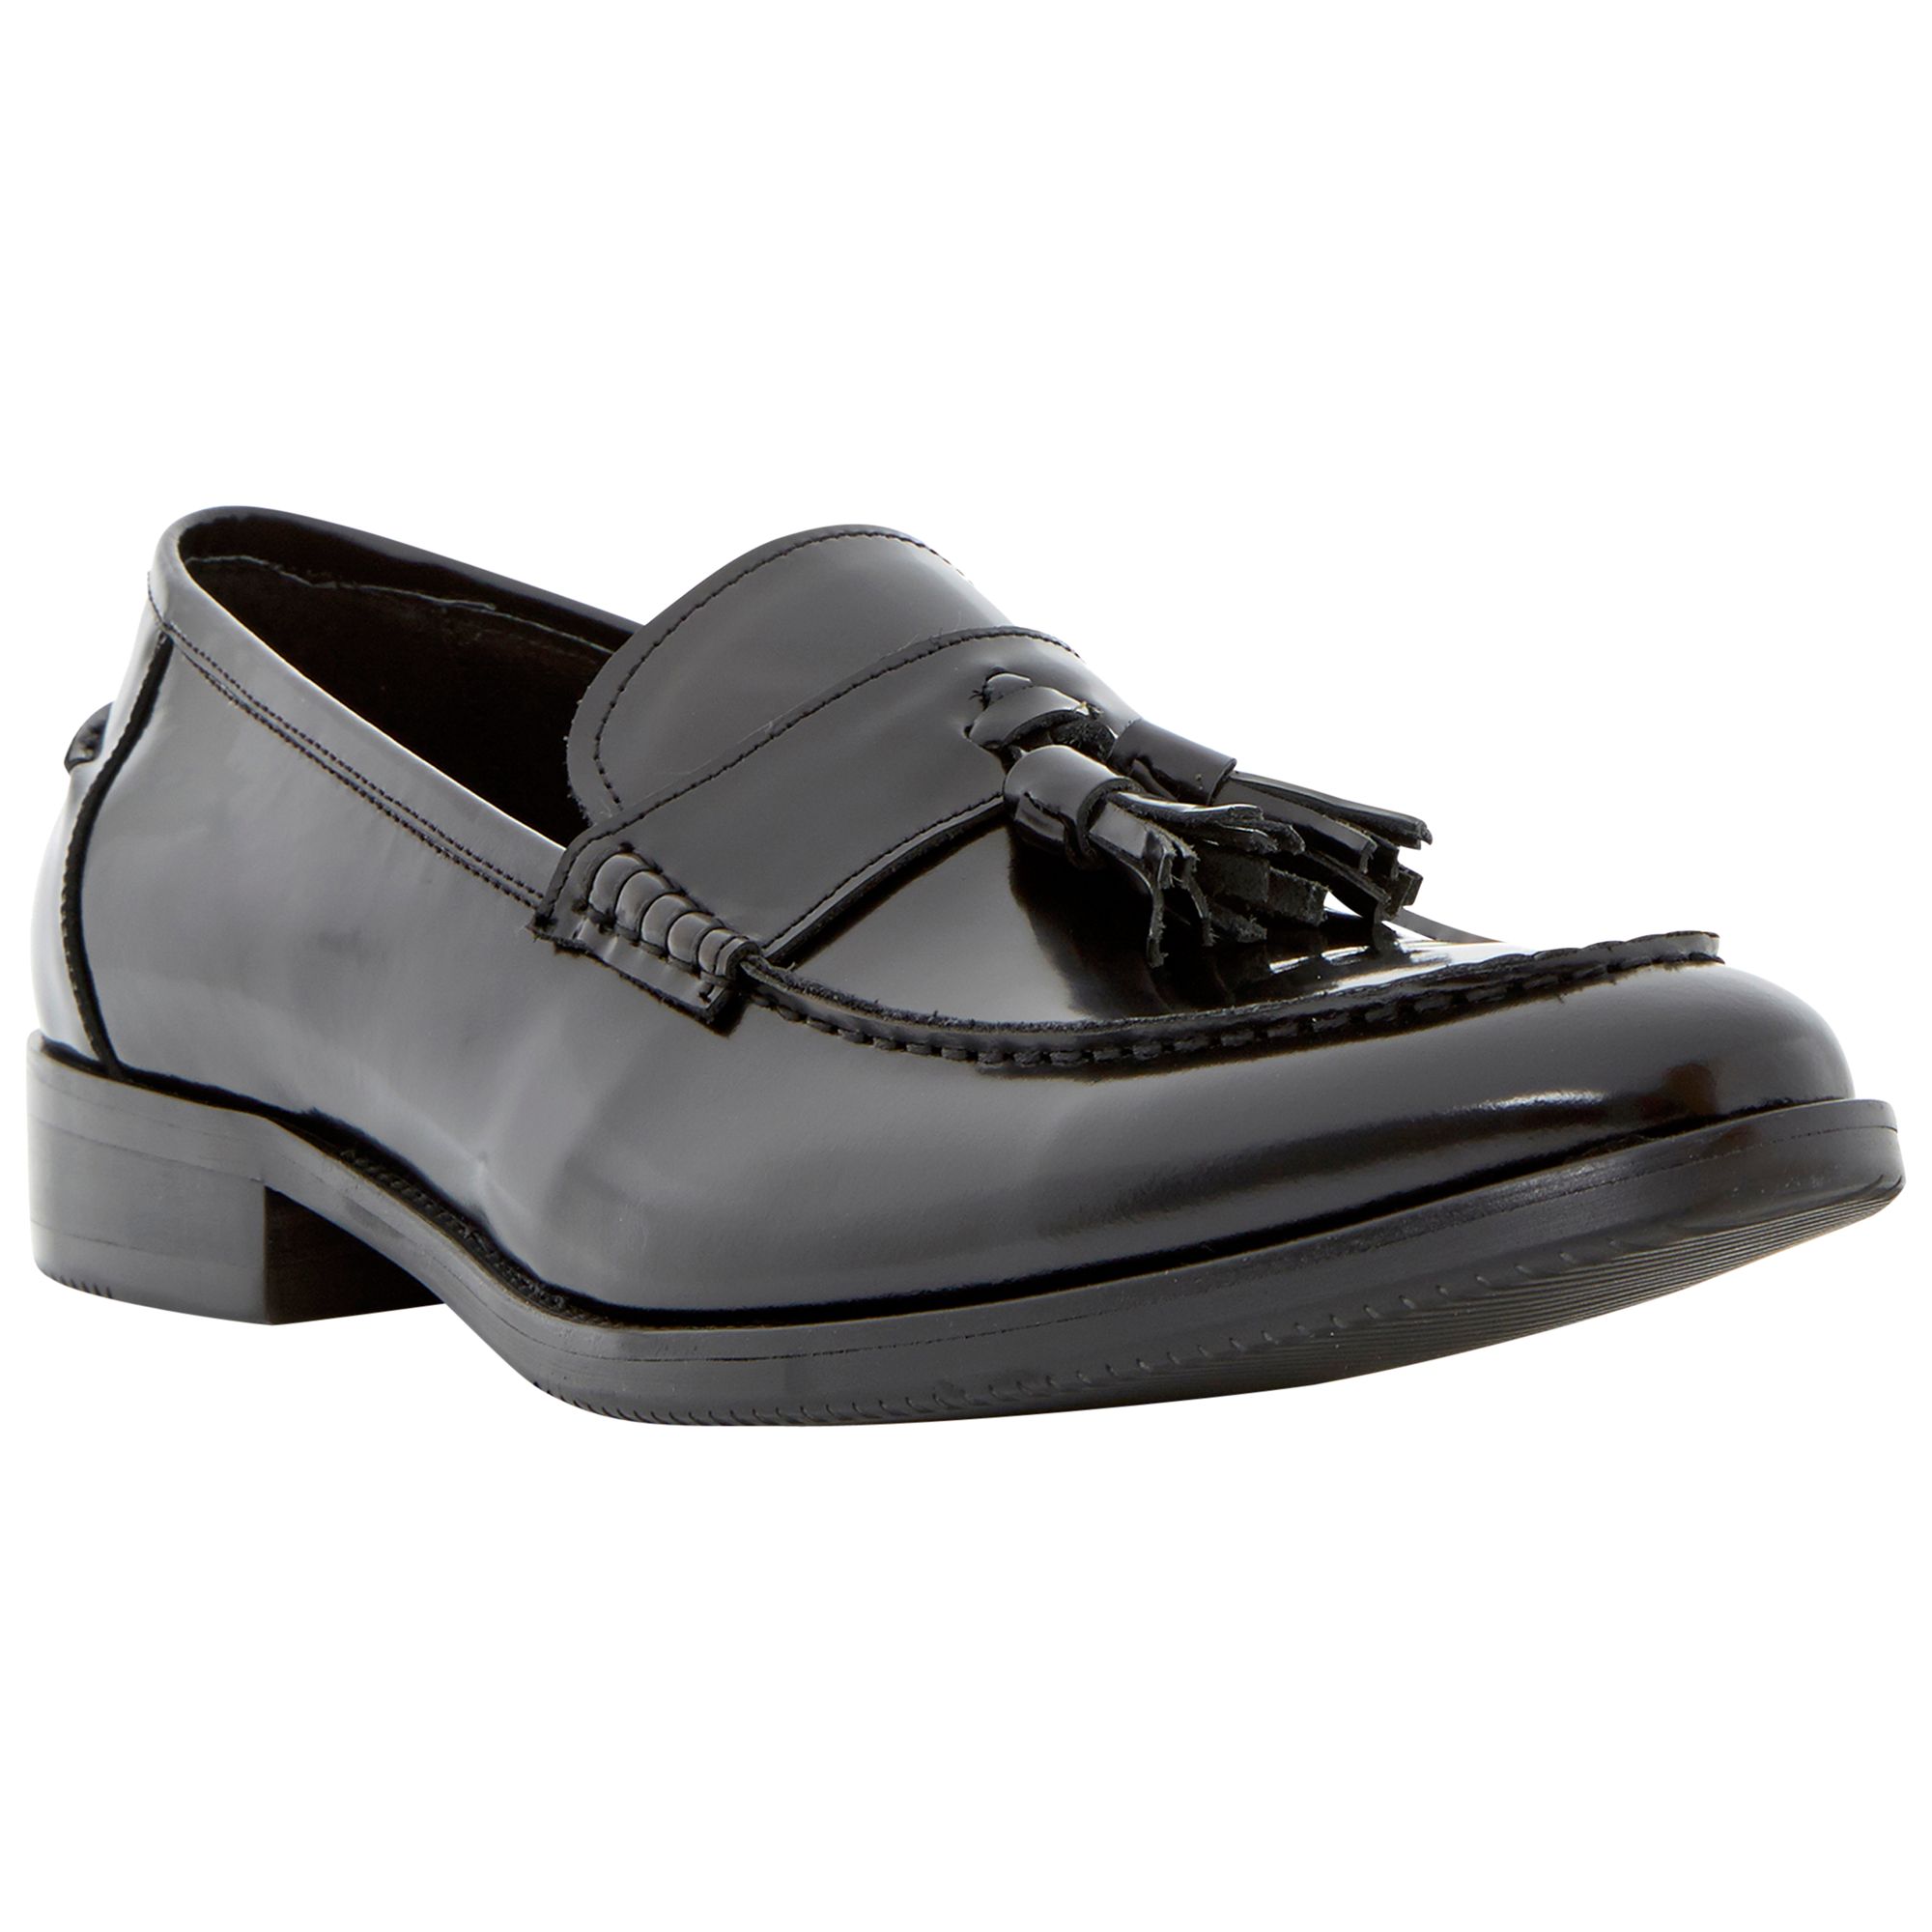 Buy Dune Ronnie Patent Leather Tassle Loafers Online at johnlewis.com